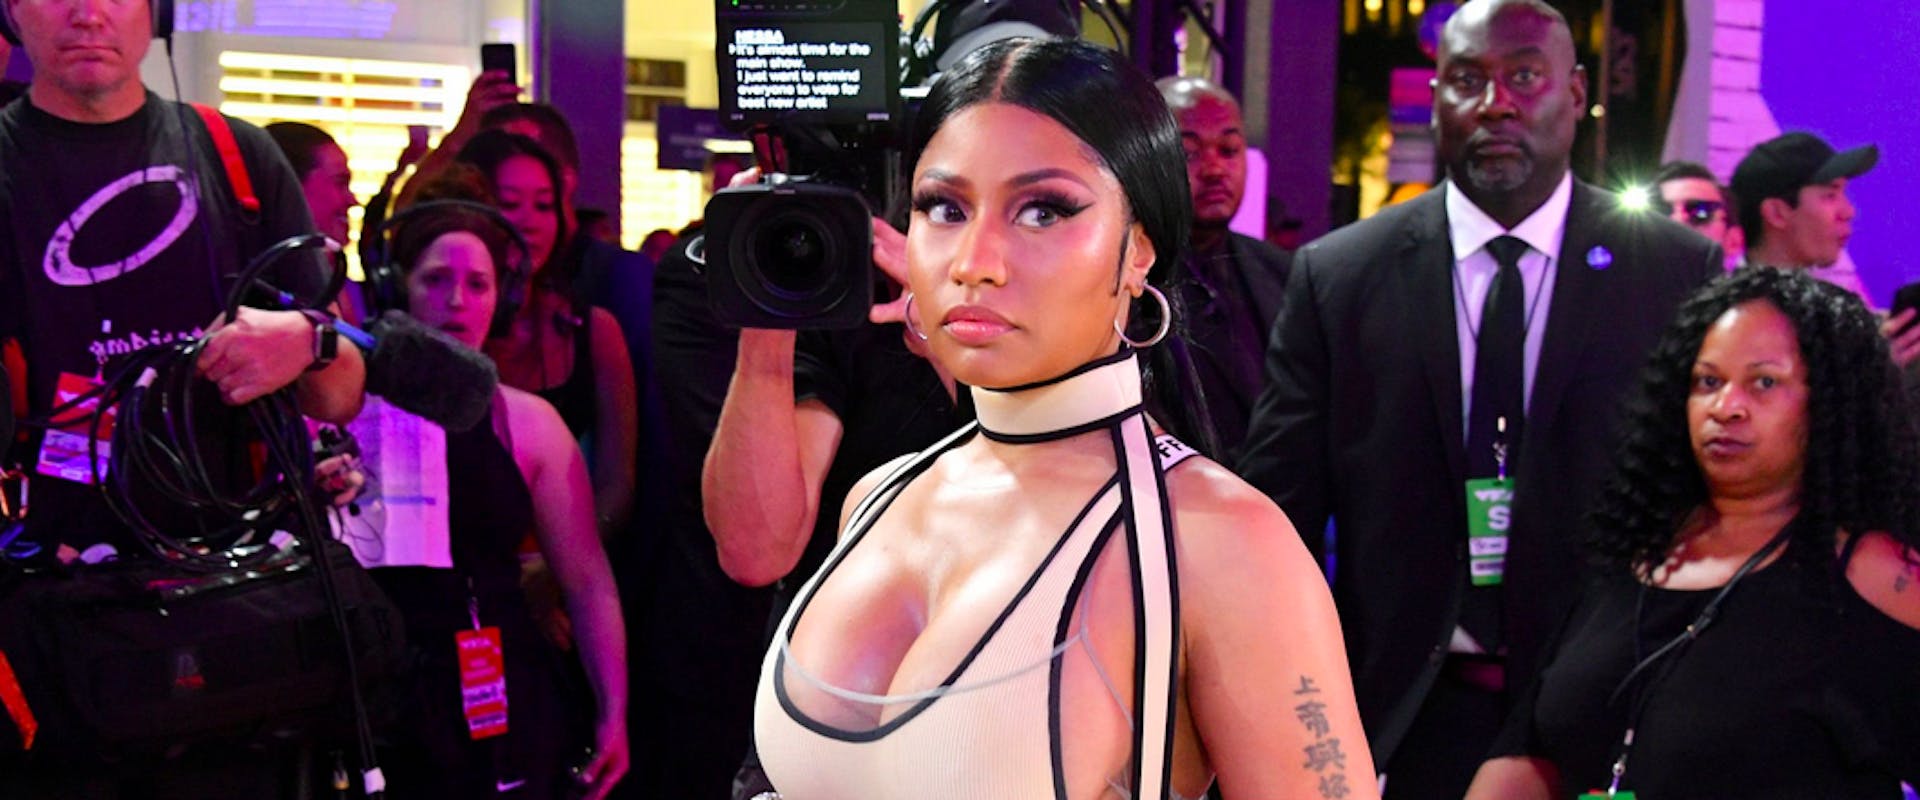 NEW YORK, NY - AUGUST 20: Nicki Minaj attends the 2018 MTV Video Music Awards at Radio City Music Hall on August 20, 2018 in New York City. 